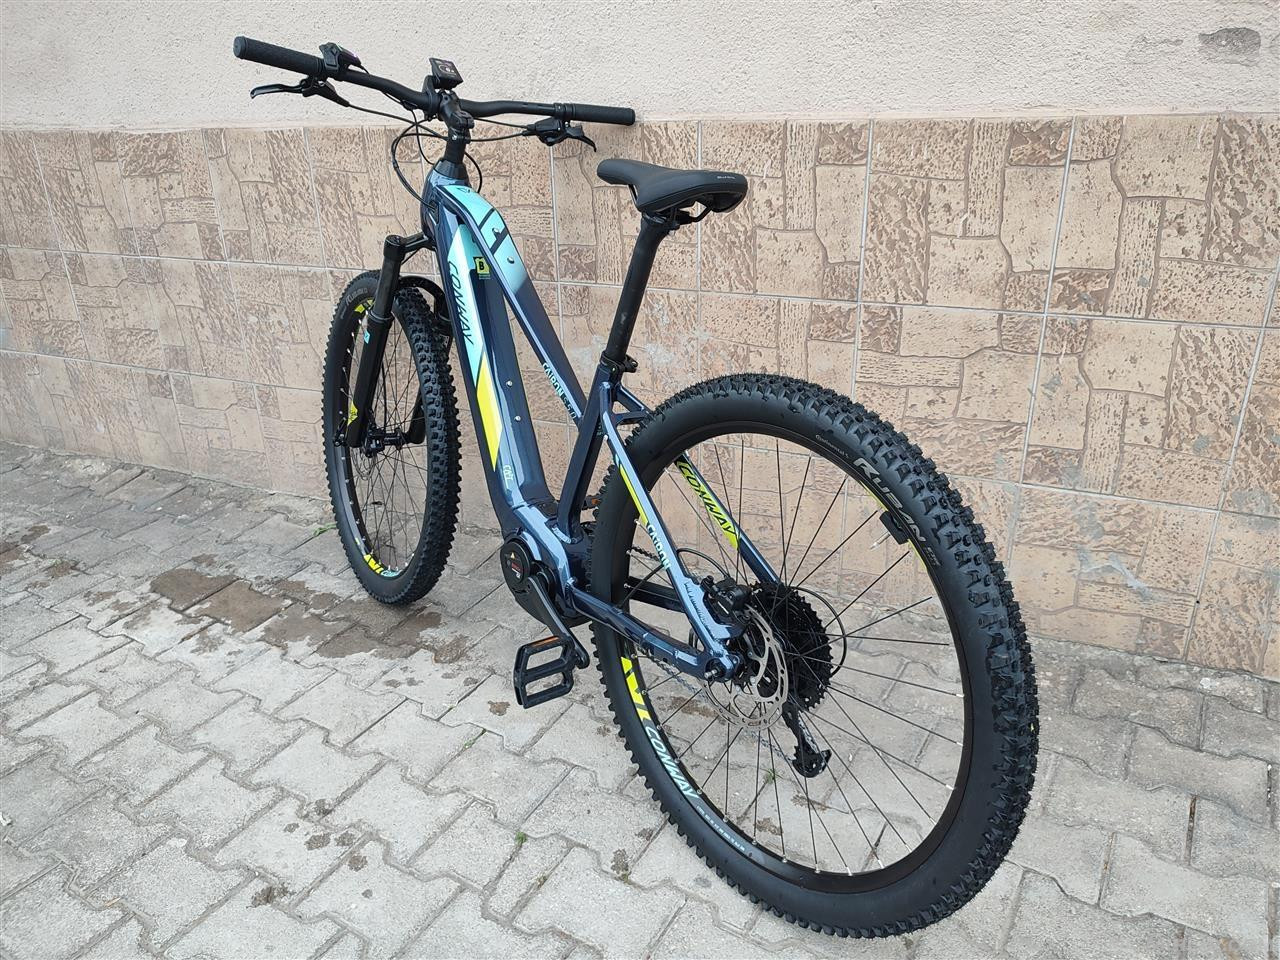 NEW 00km. E-MTB Conway Cairon S 5.0 er.29 On Sale